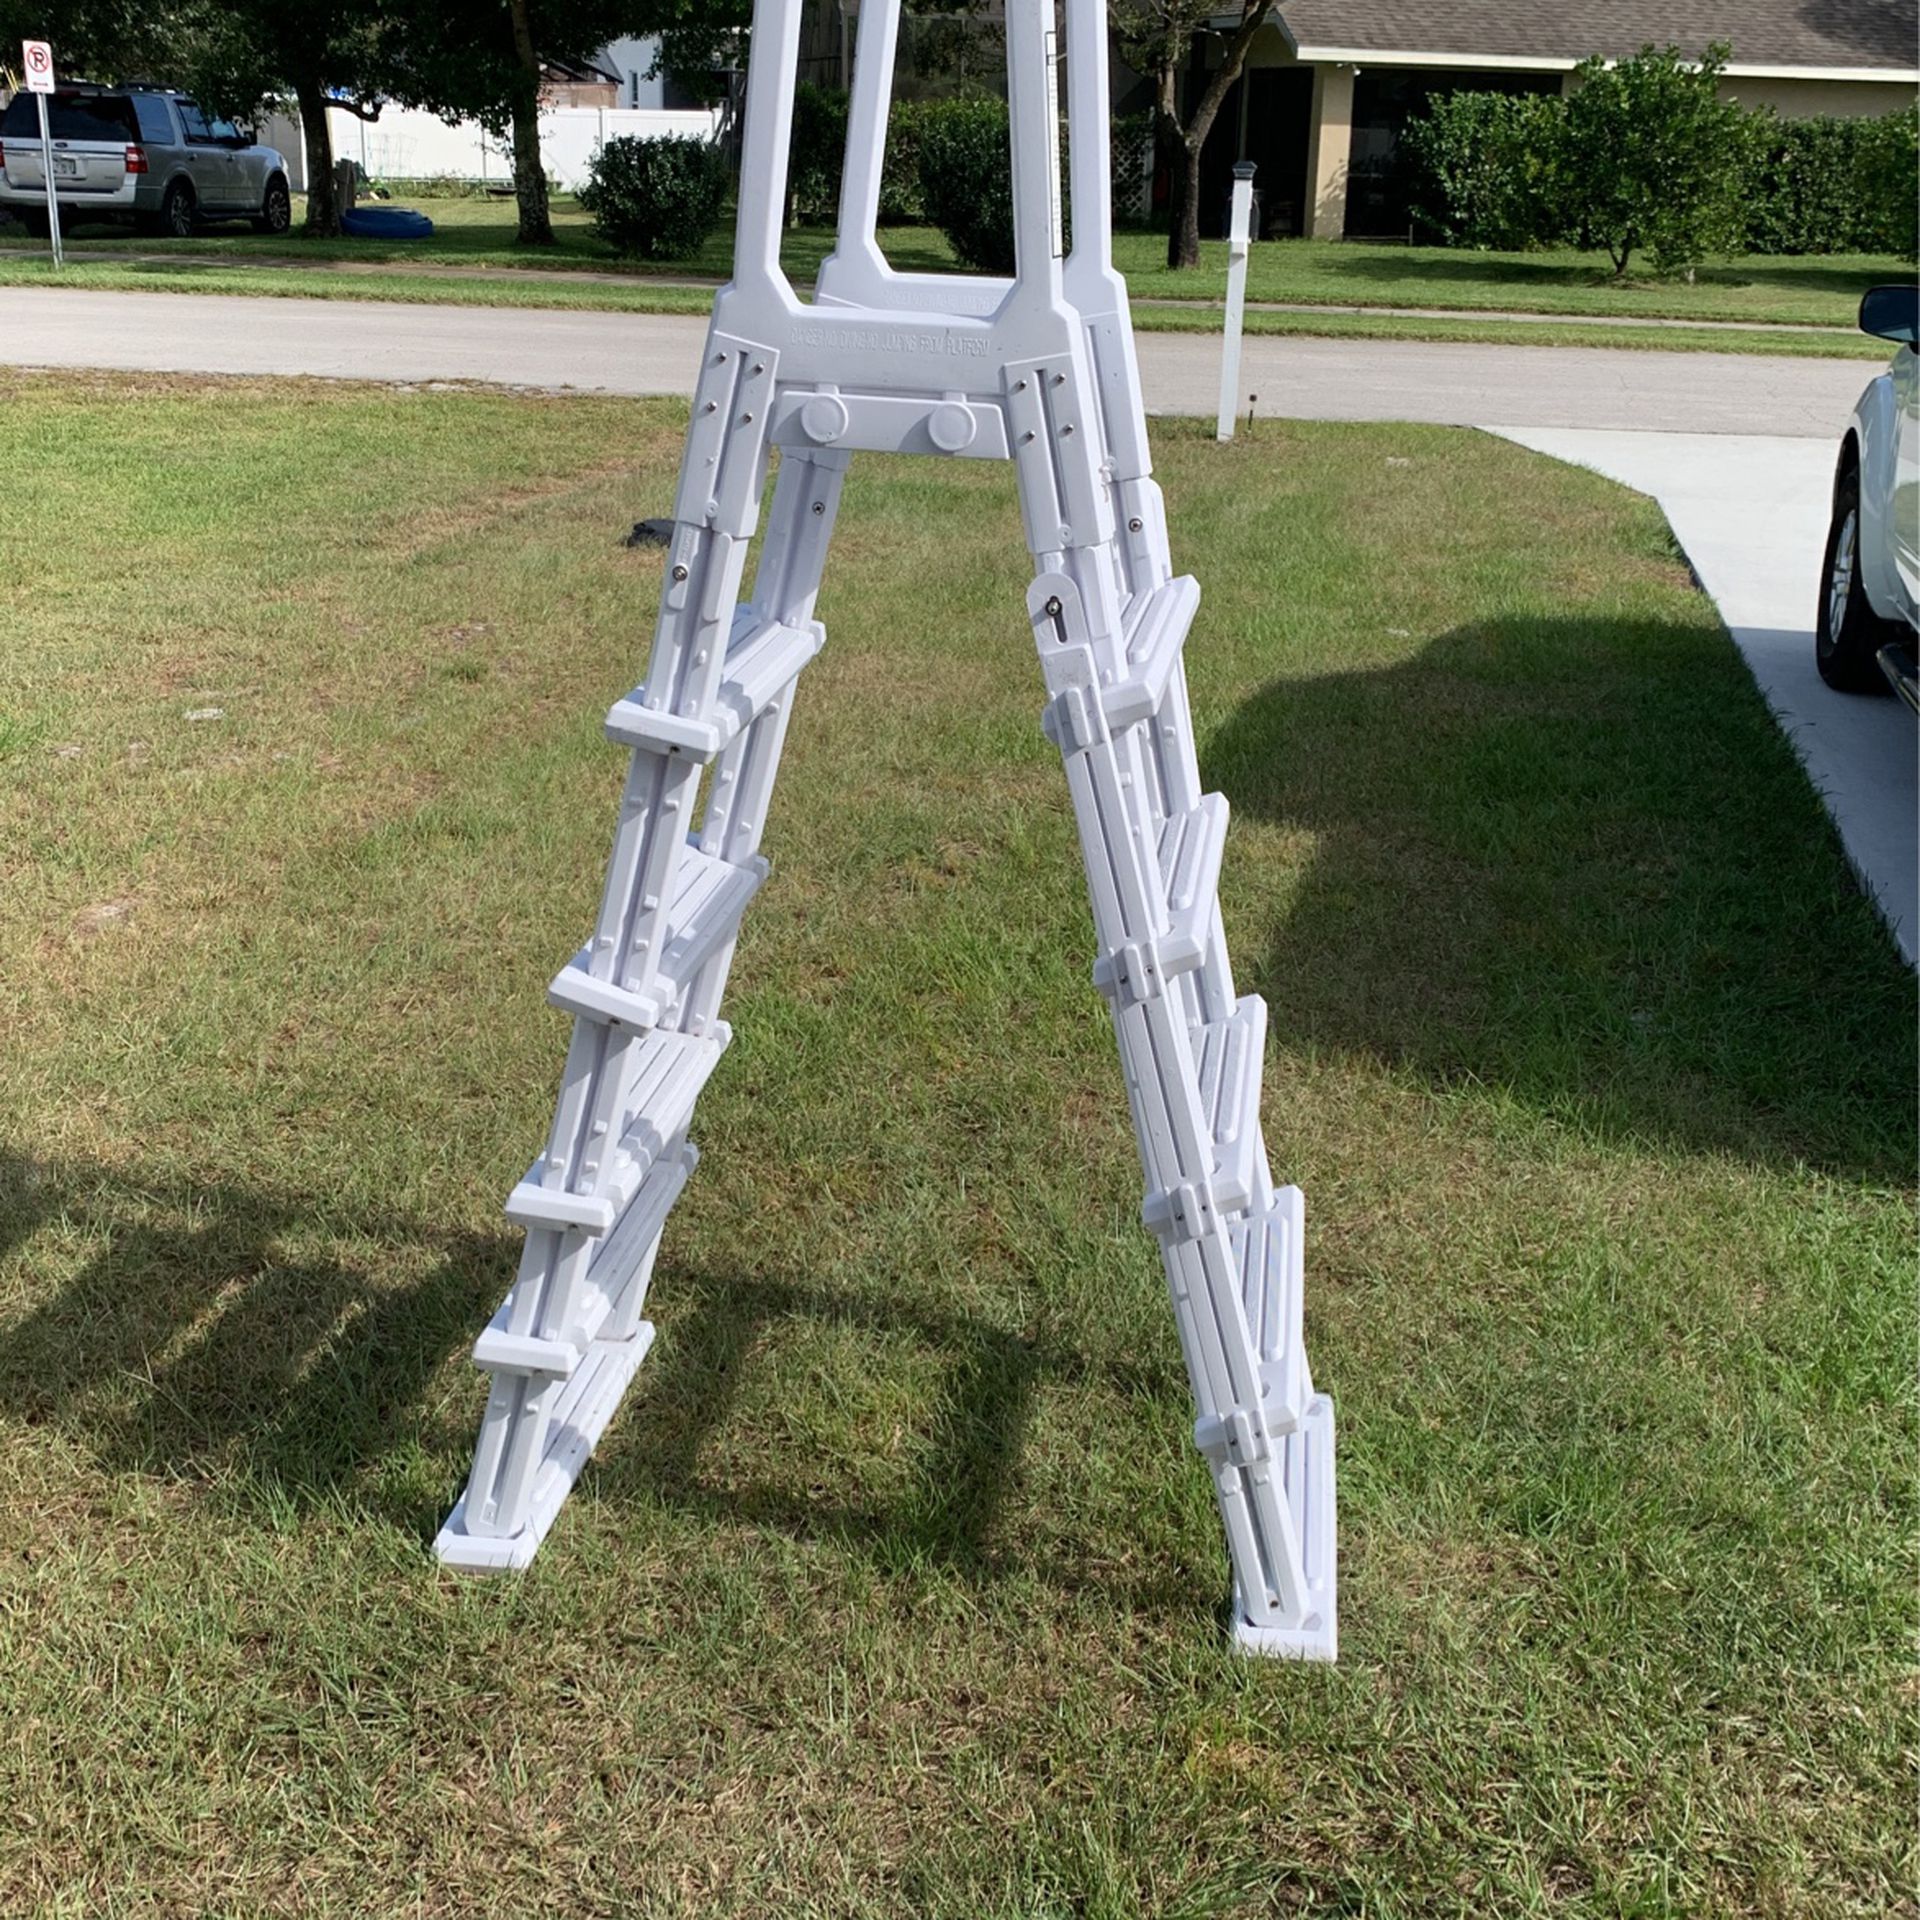 Like New Above Ground POOL LADDER PVC WHITE RENFORCED WITH SAND WEIGHTED FEET EXCELLENT COND Adjustable  77” Tall Sturdy 